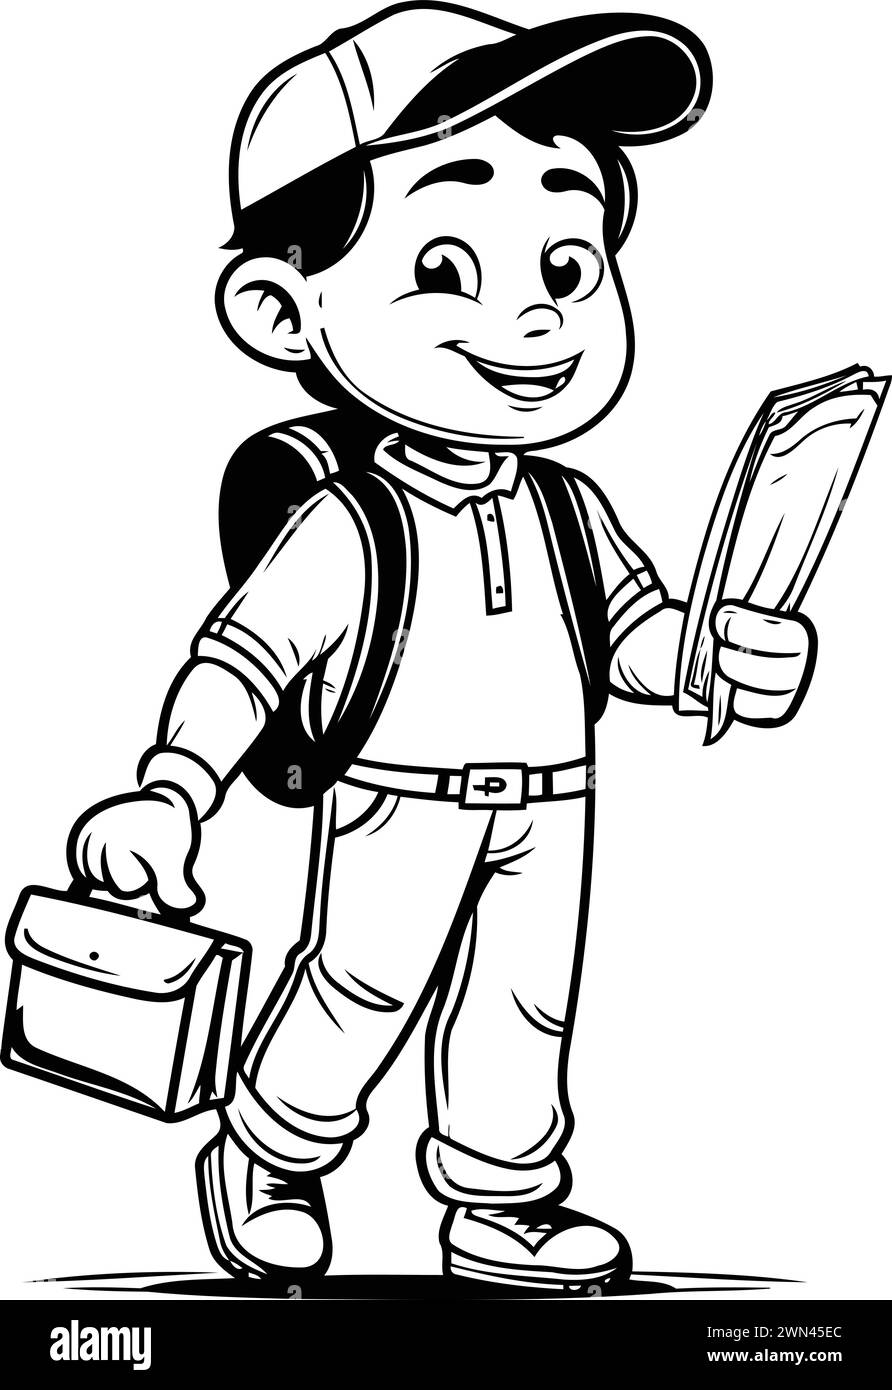 Cartoon schoolboy with a backpack and a book. Vector illustration. Stock Vector